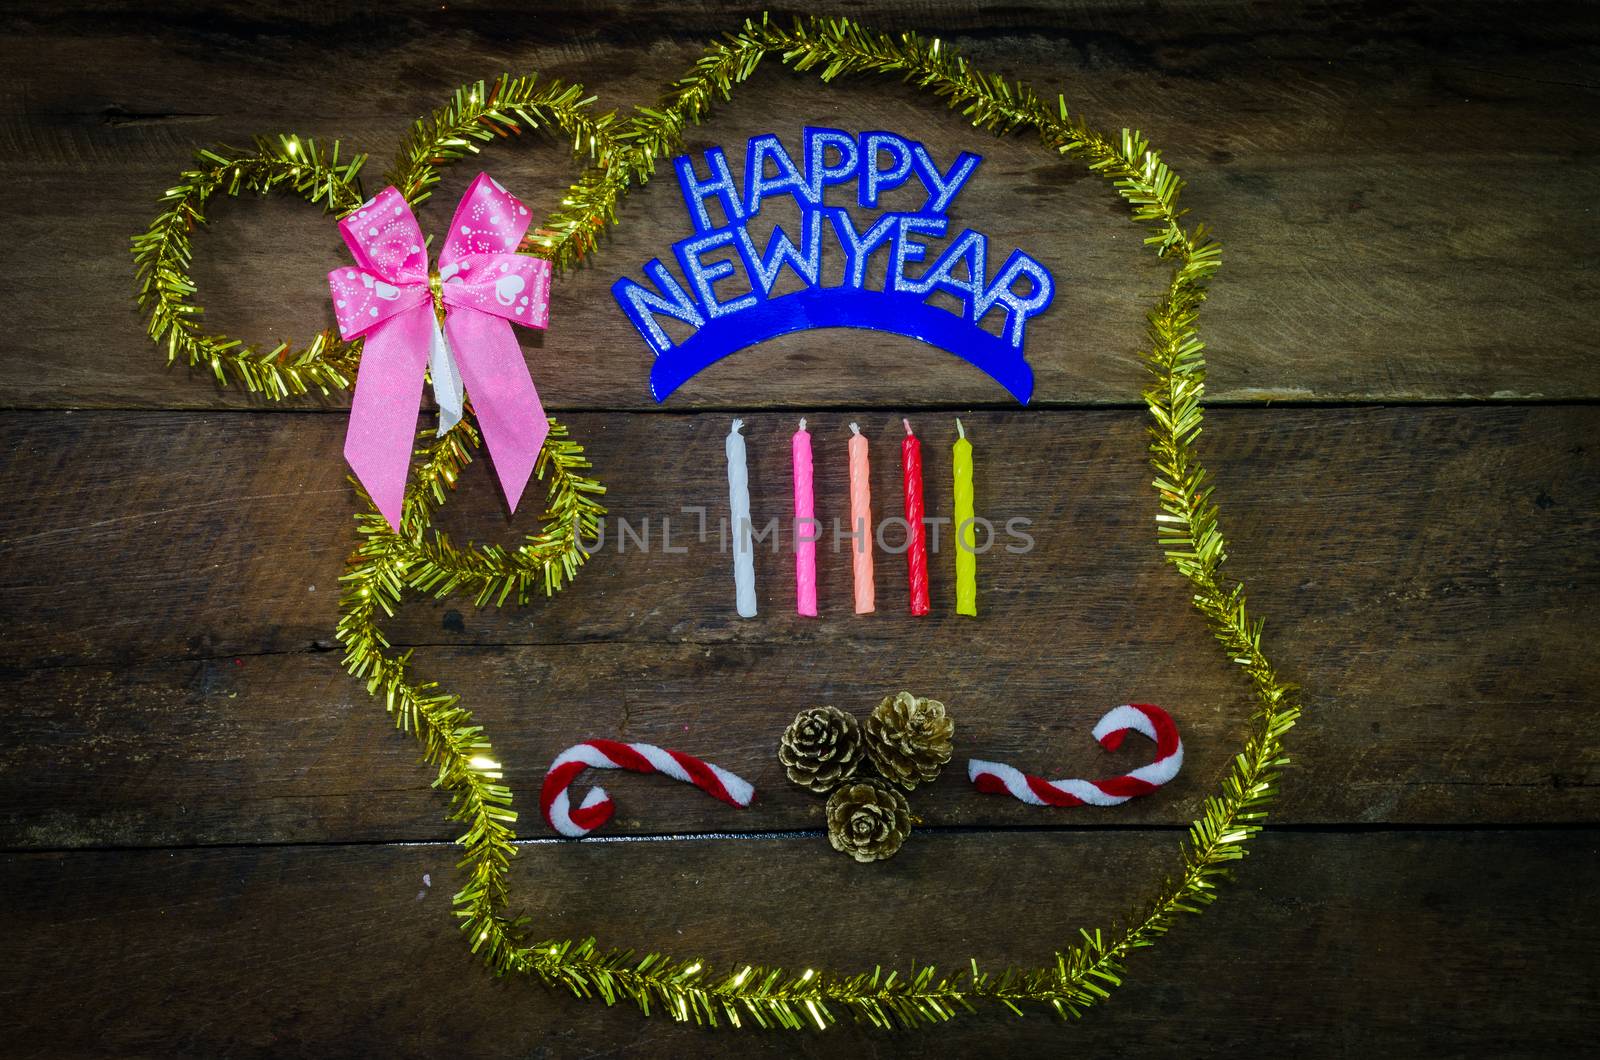 happy New Year message and gift box on wooden background. by photobyphotoboy